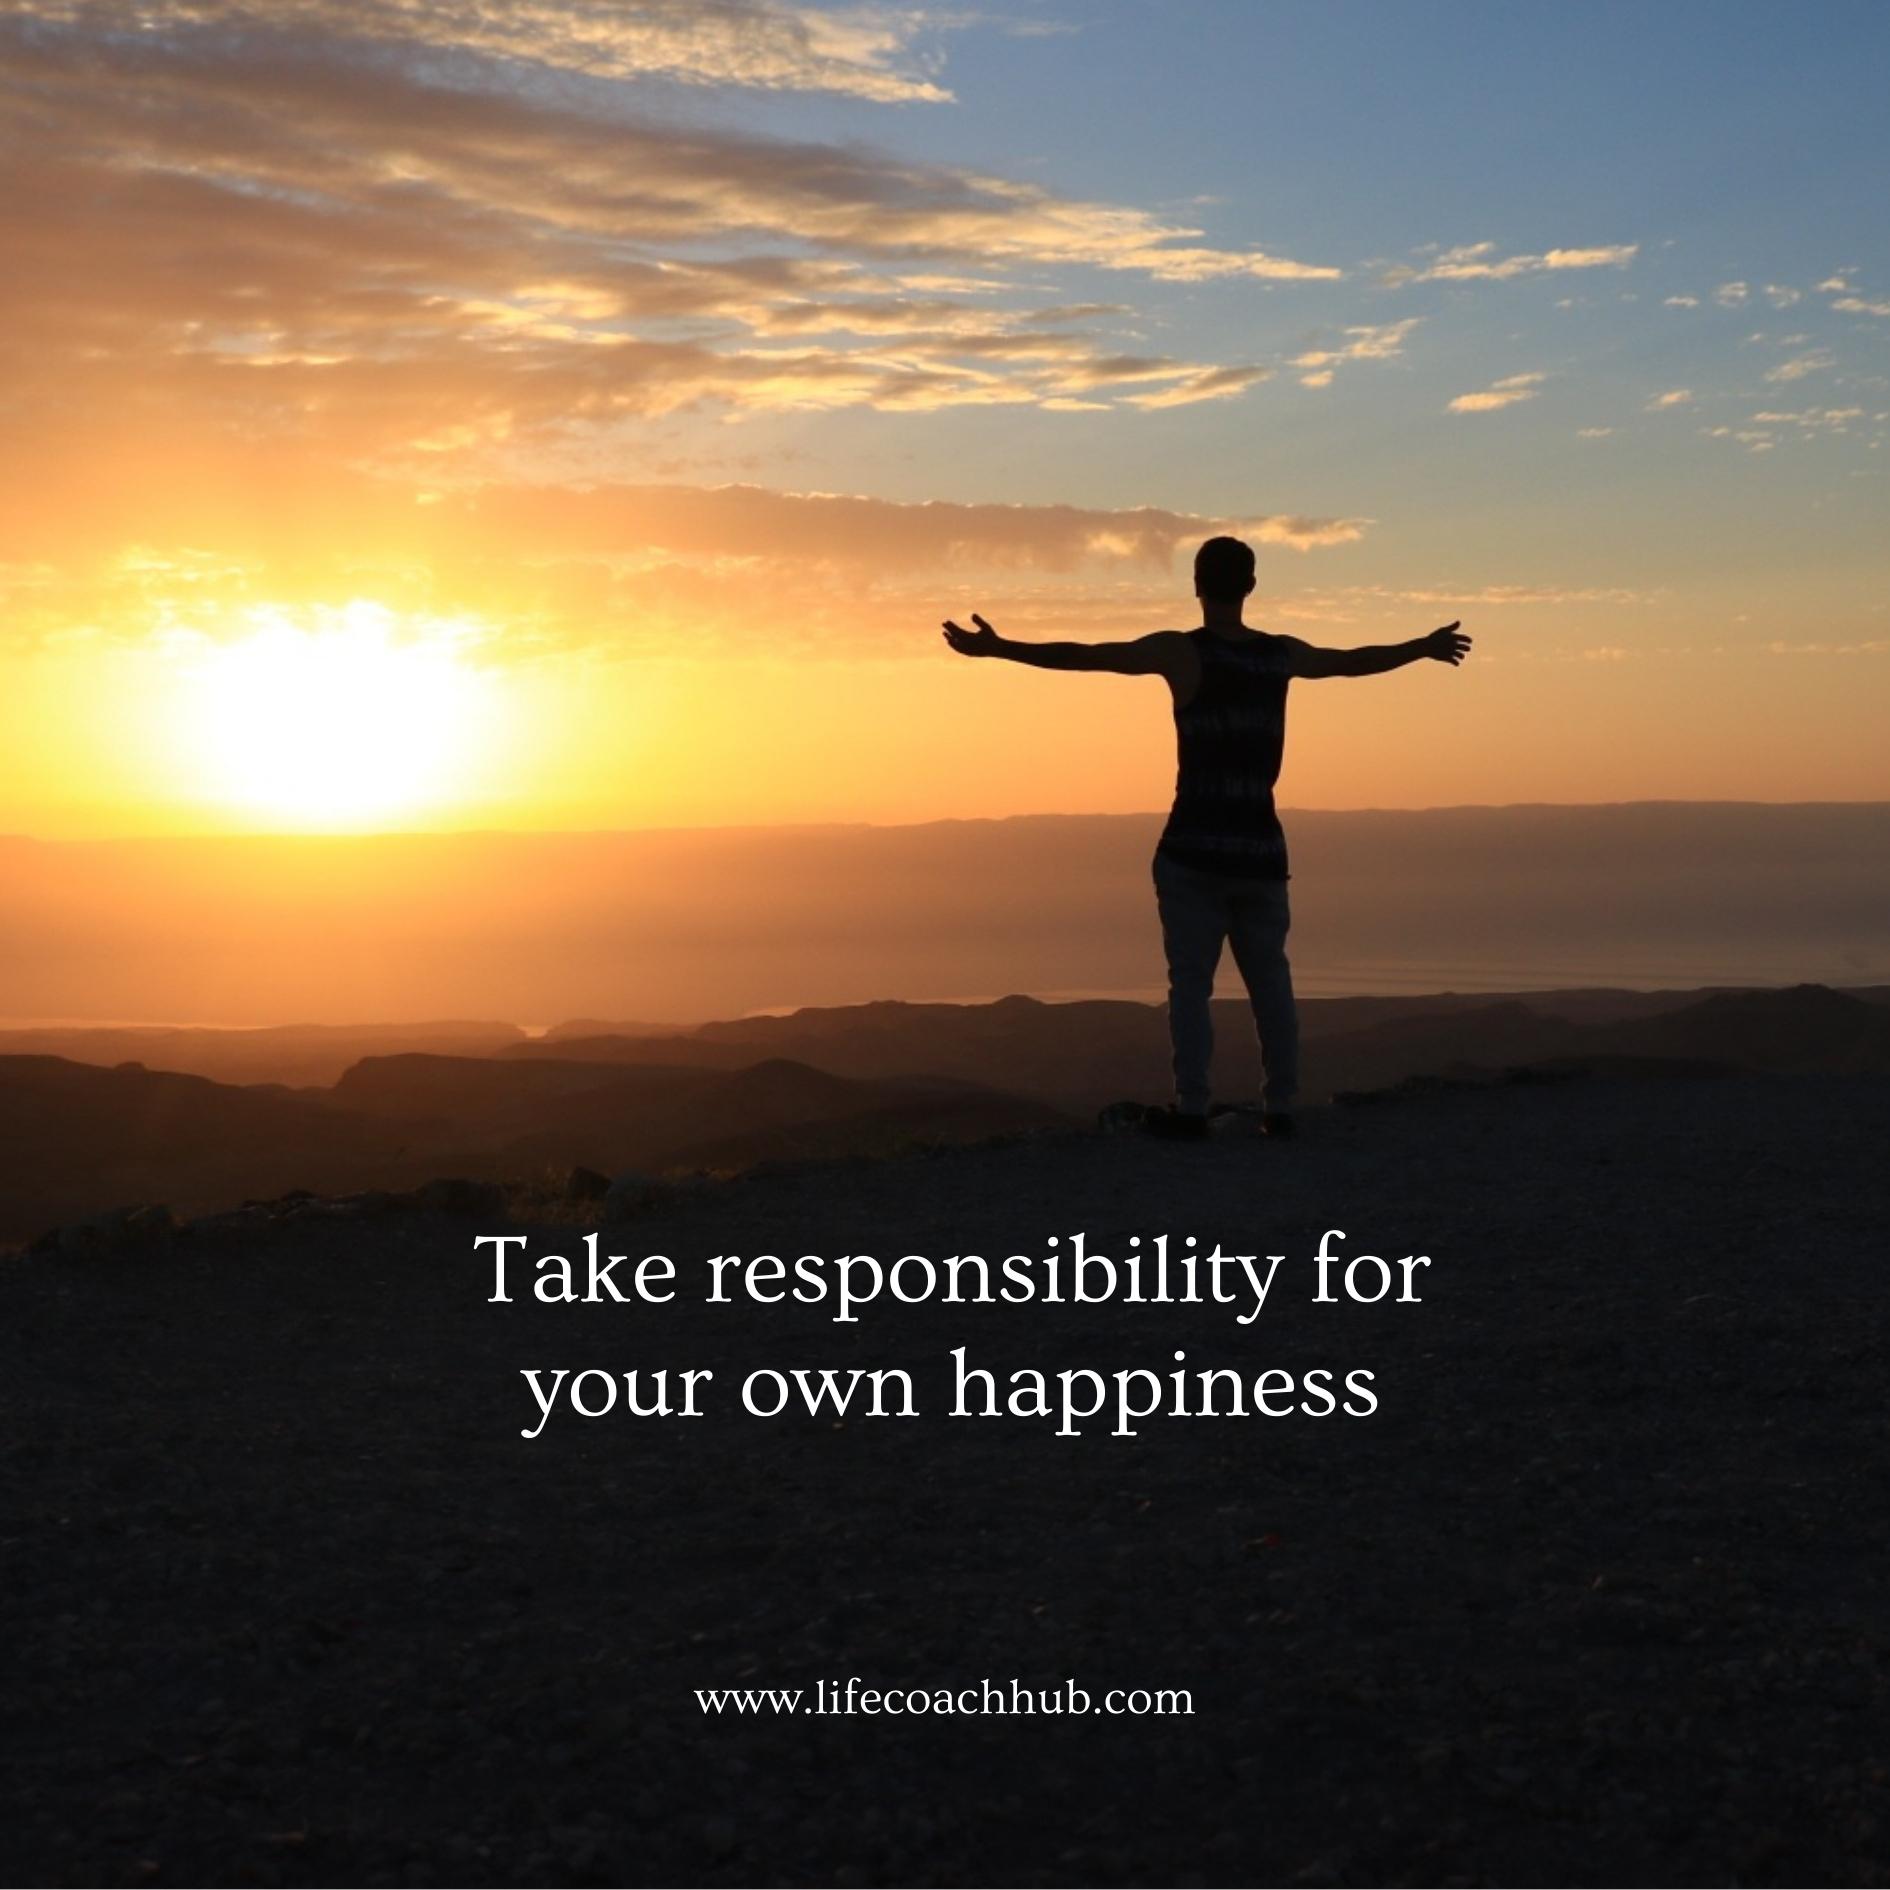 Take responsibility for your own happiness